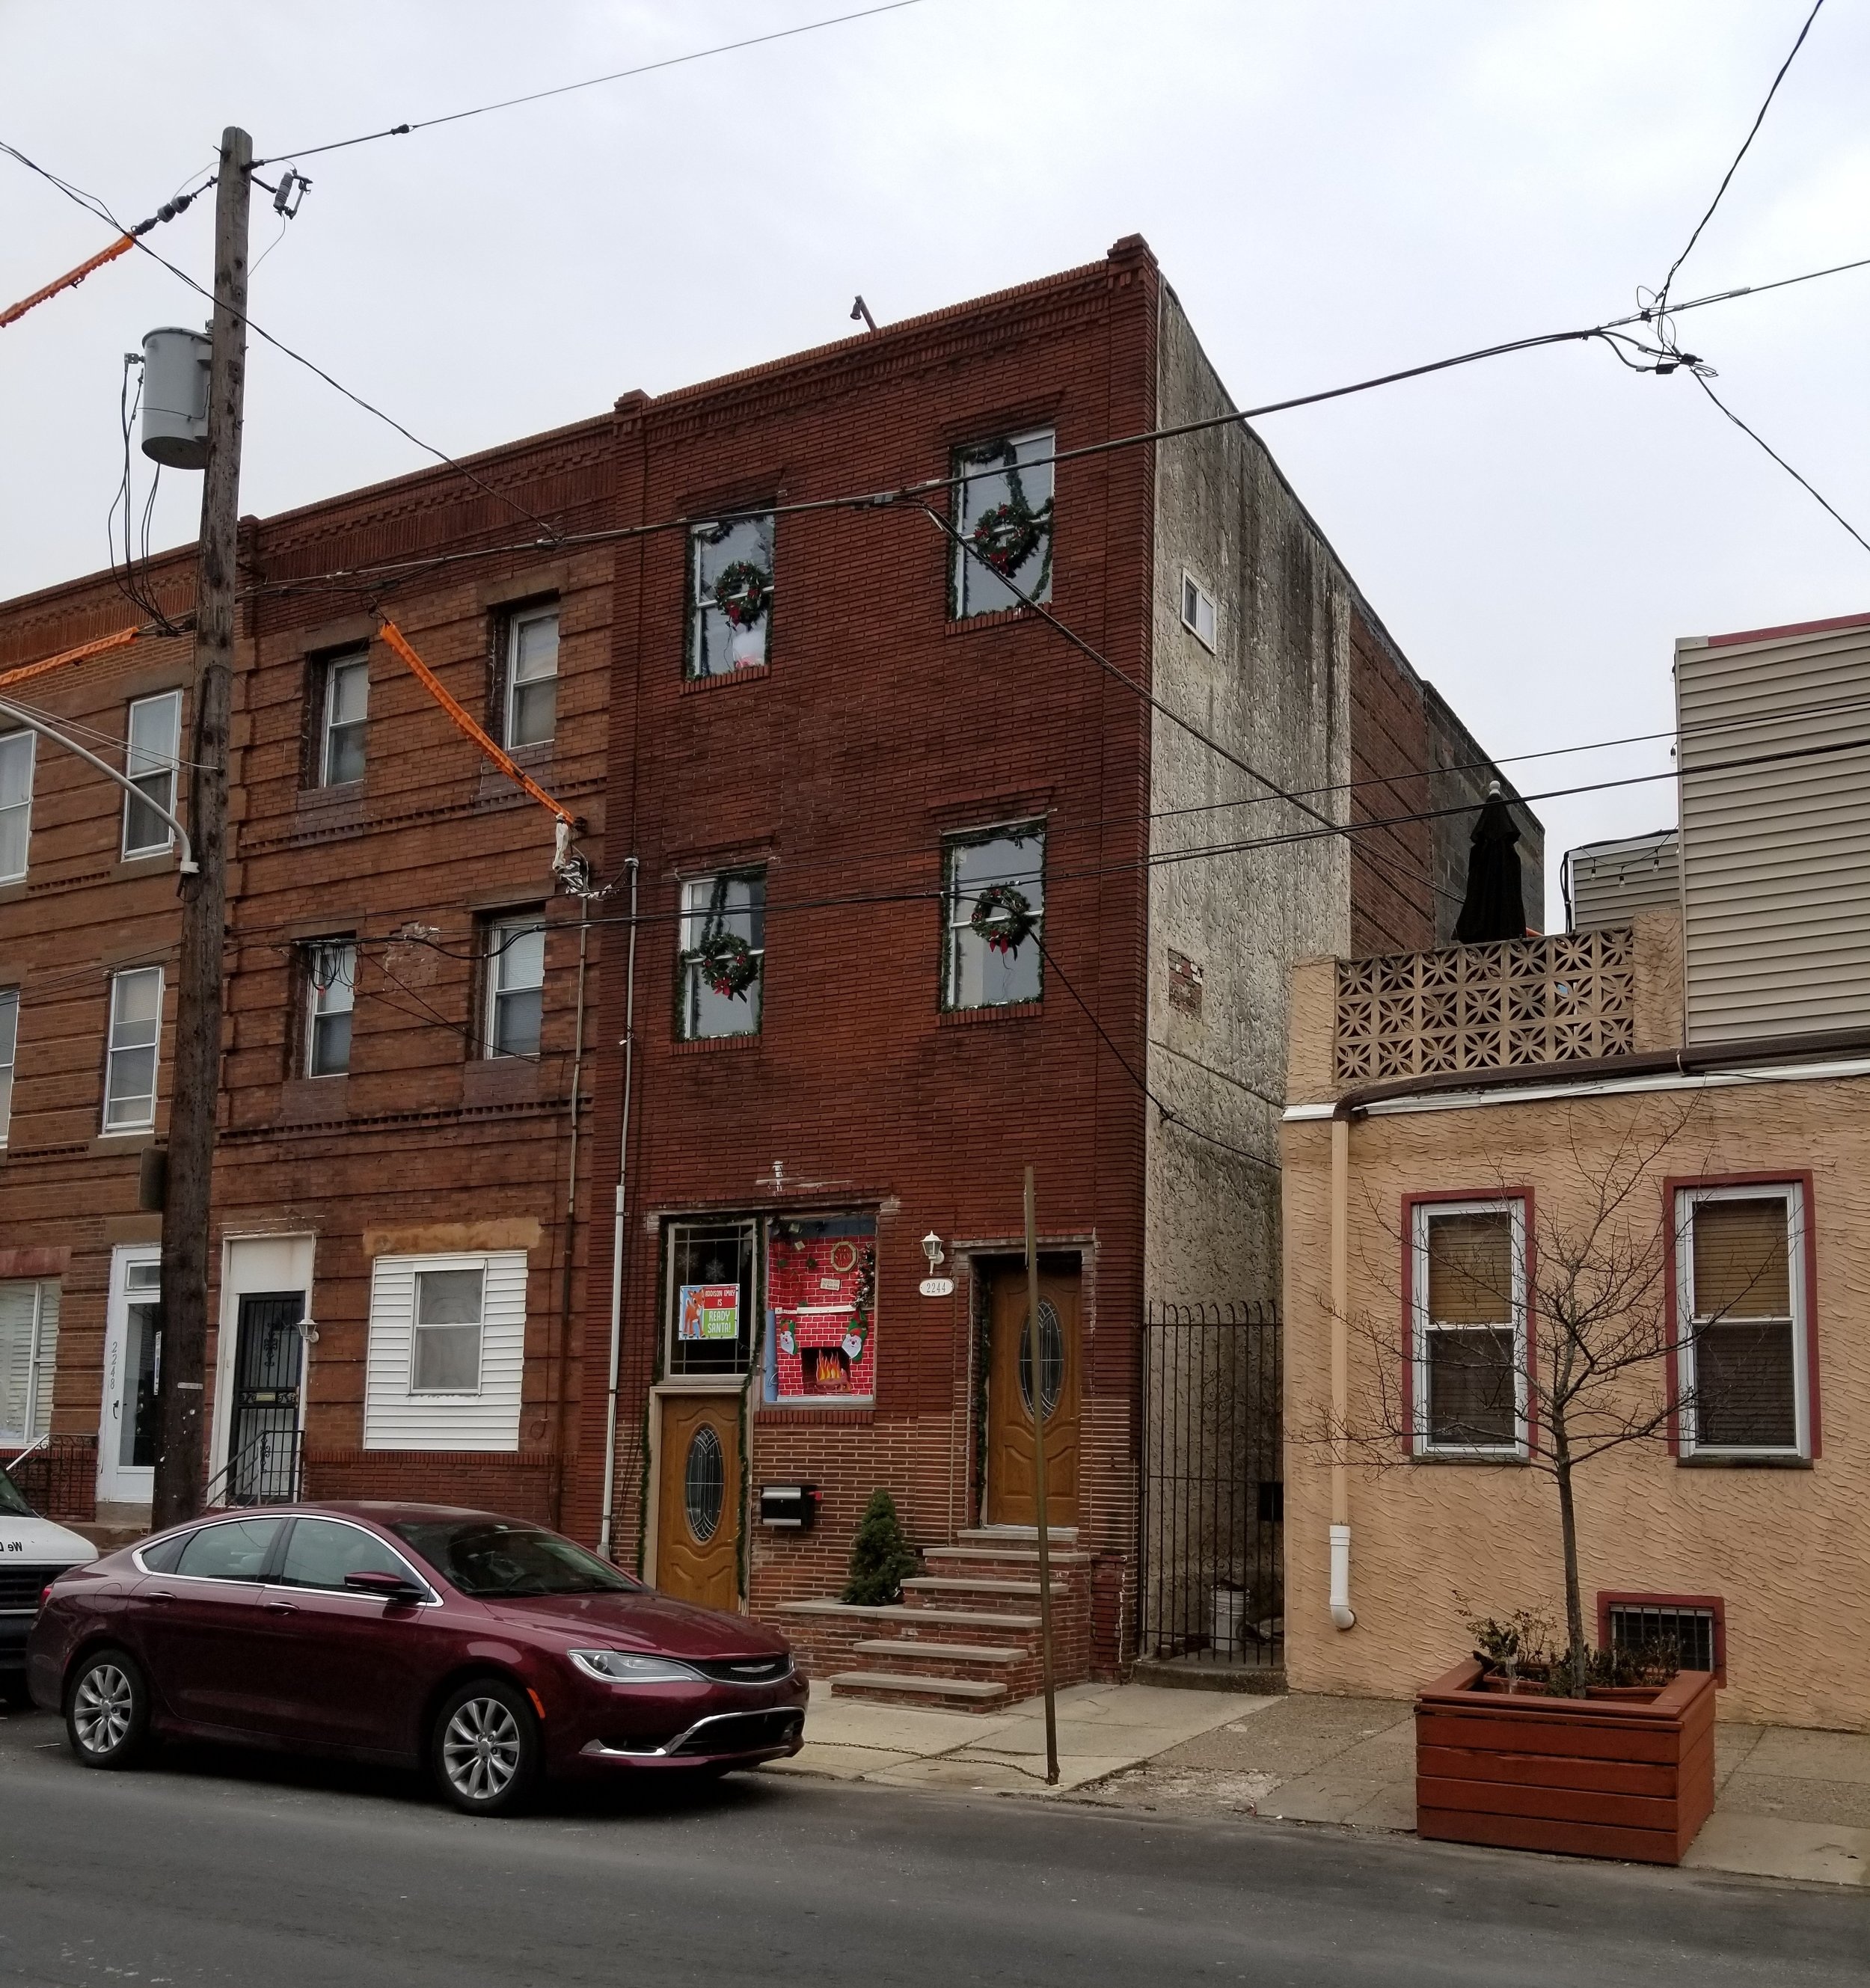 See, they even have cardboard chimneys in South Philly!